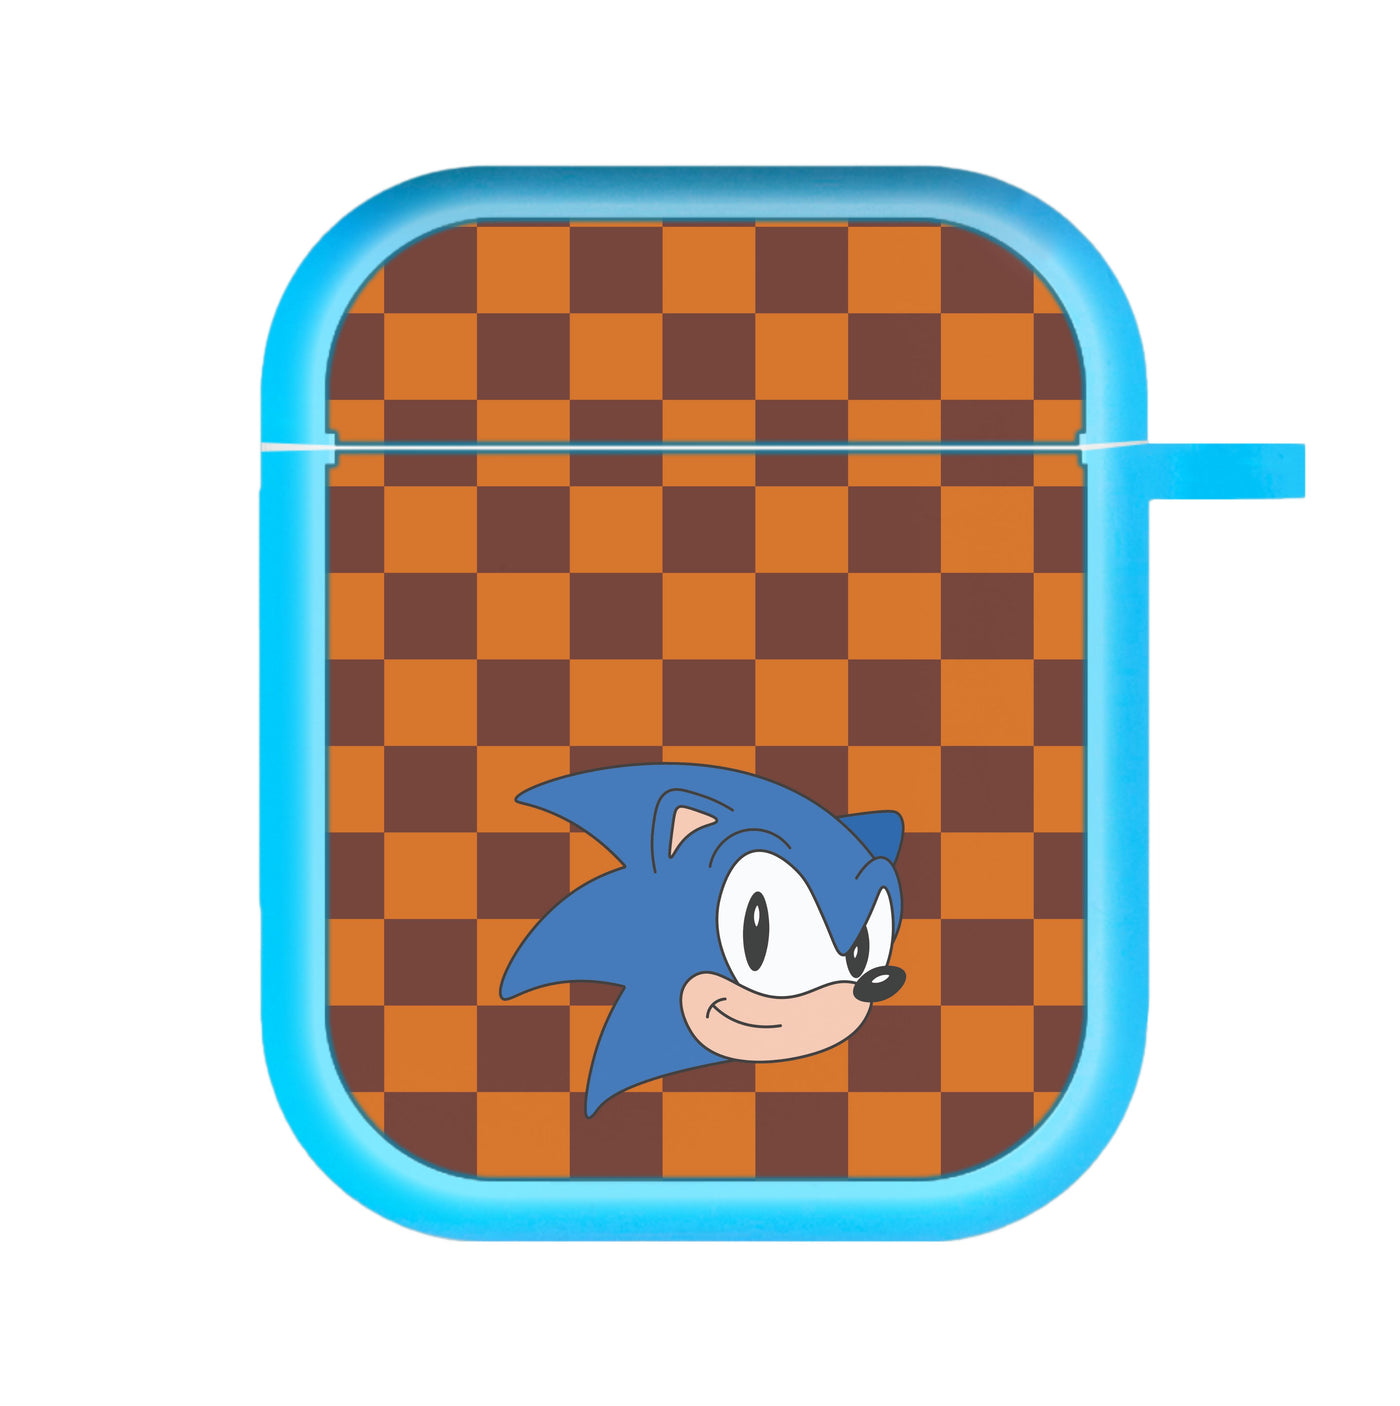 Checkered Sonic - Sonic AirPods Case